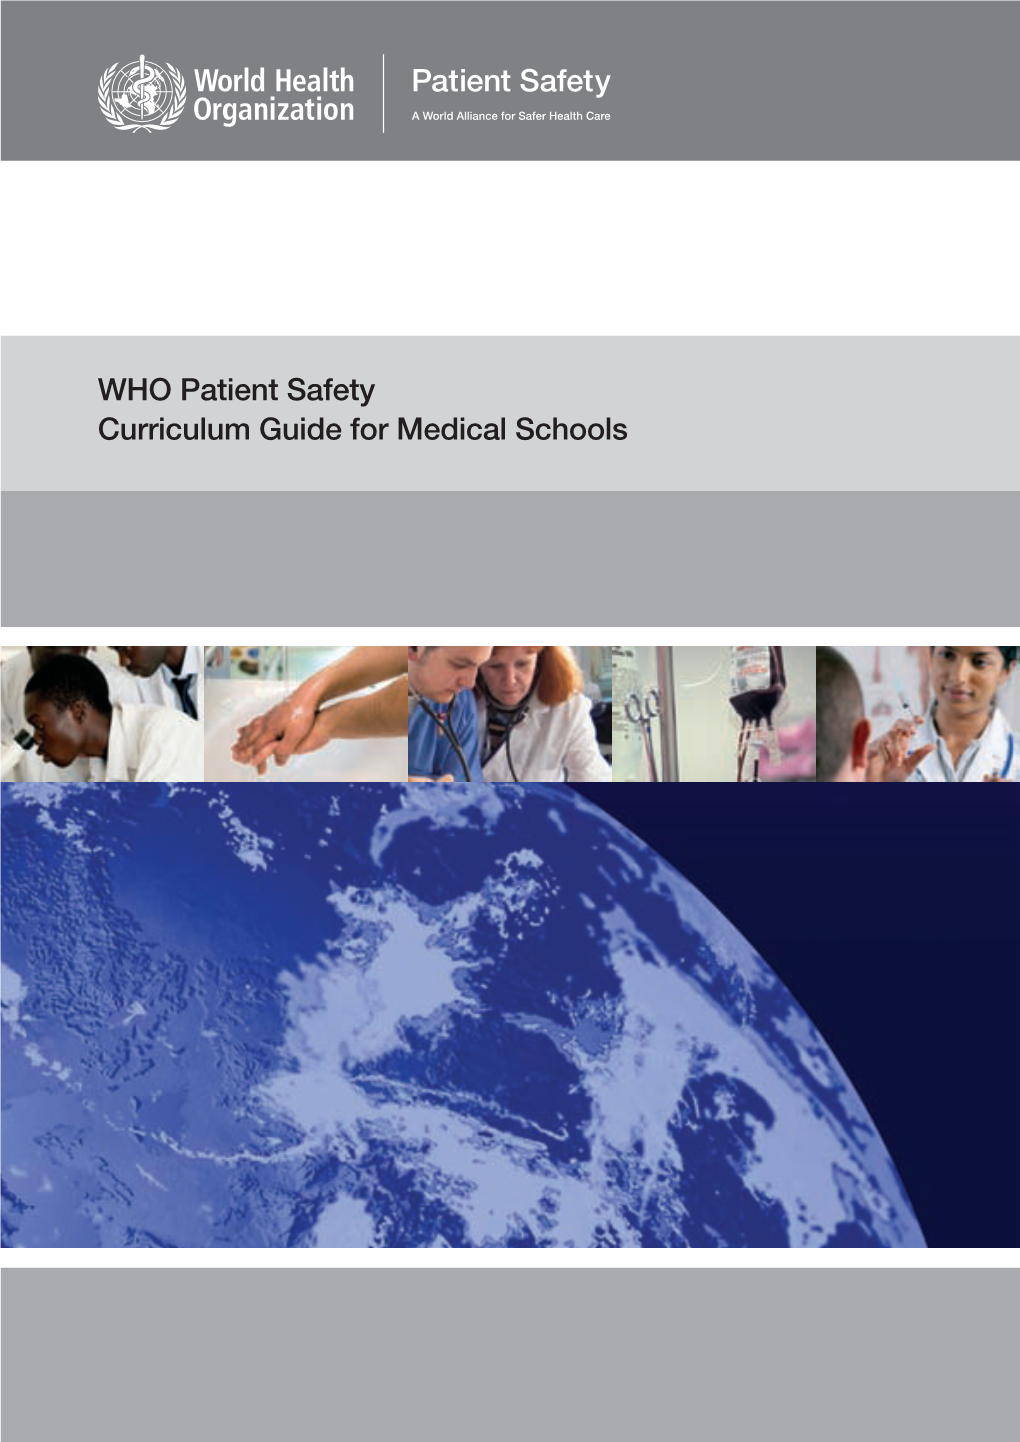 WHO Patient Safety: Curriculum Guide for Medical Schools